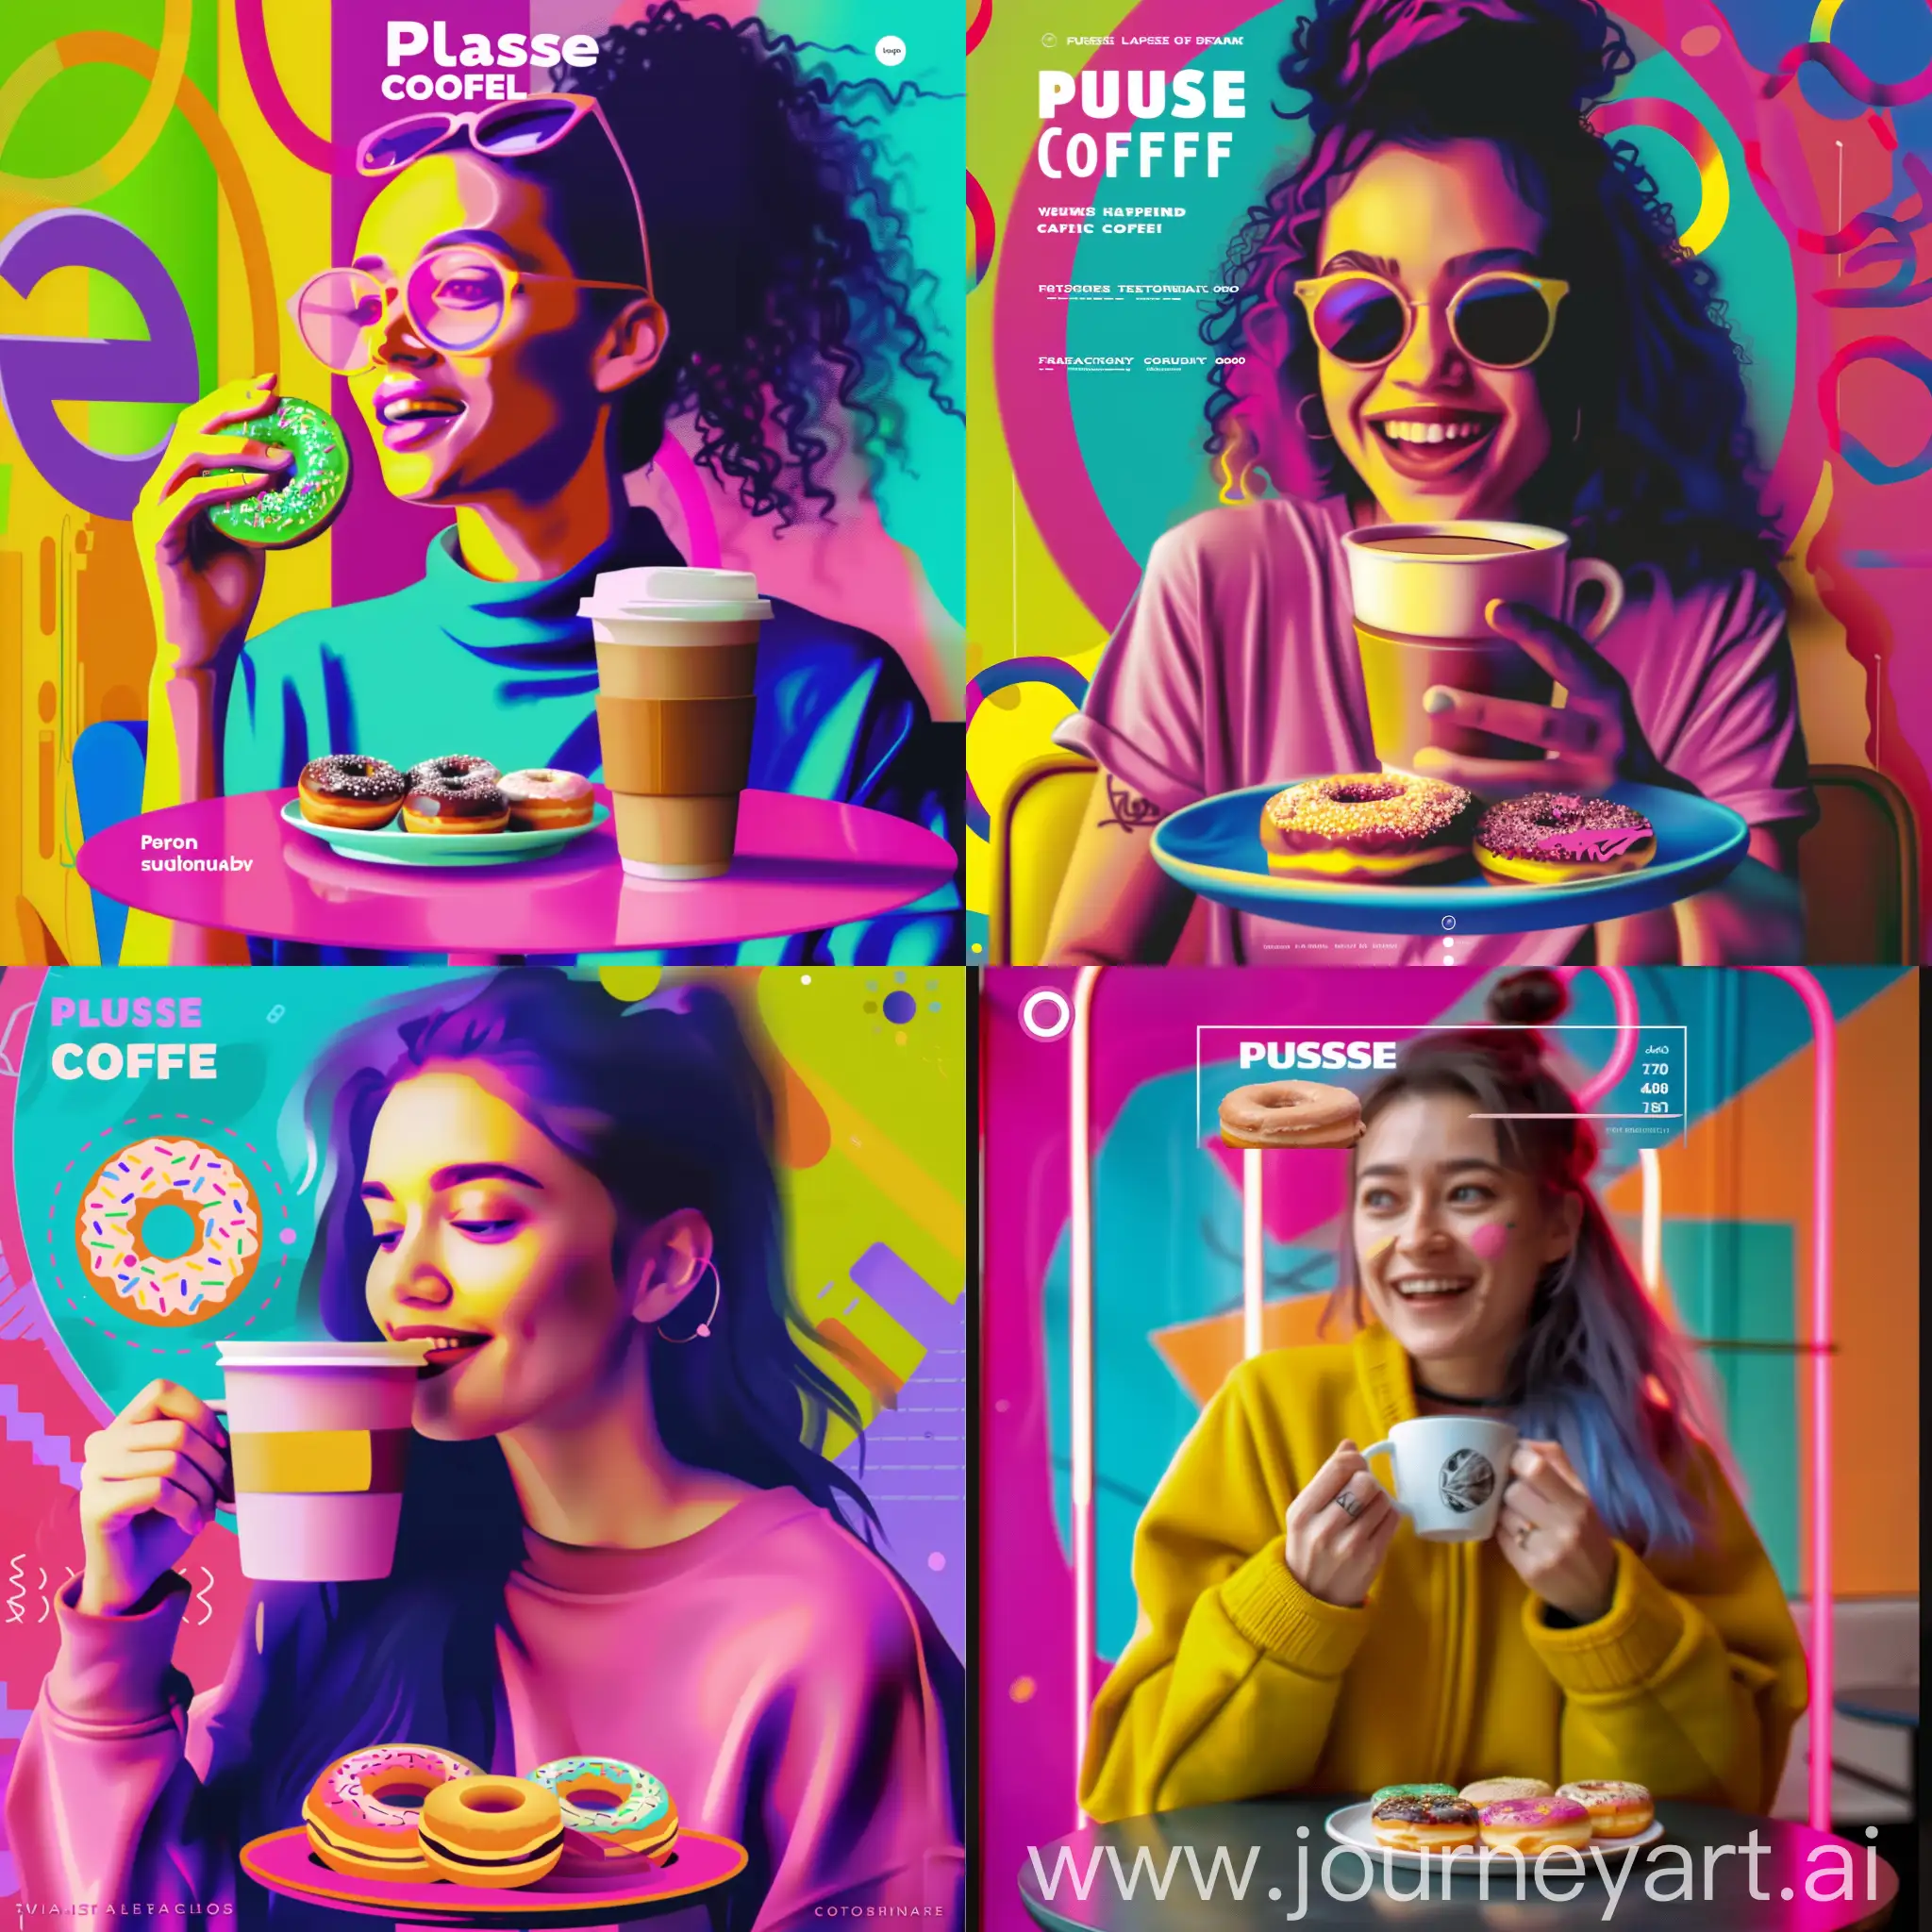 Stylish-Woman-Enjoying-Coffee-and-Donuts-in-Vibrant-Caf-Atmosphere